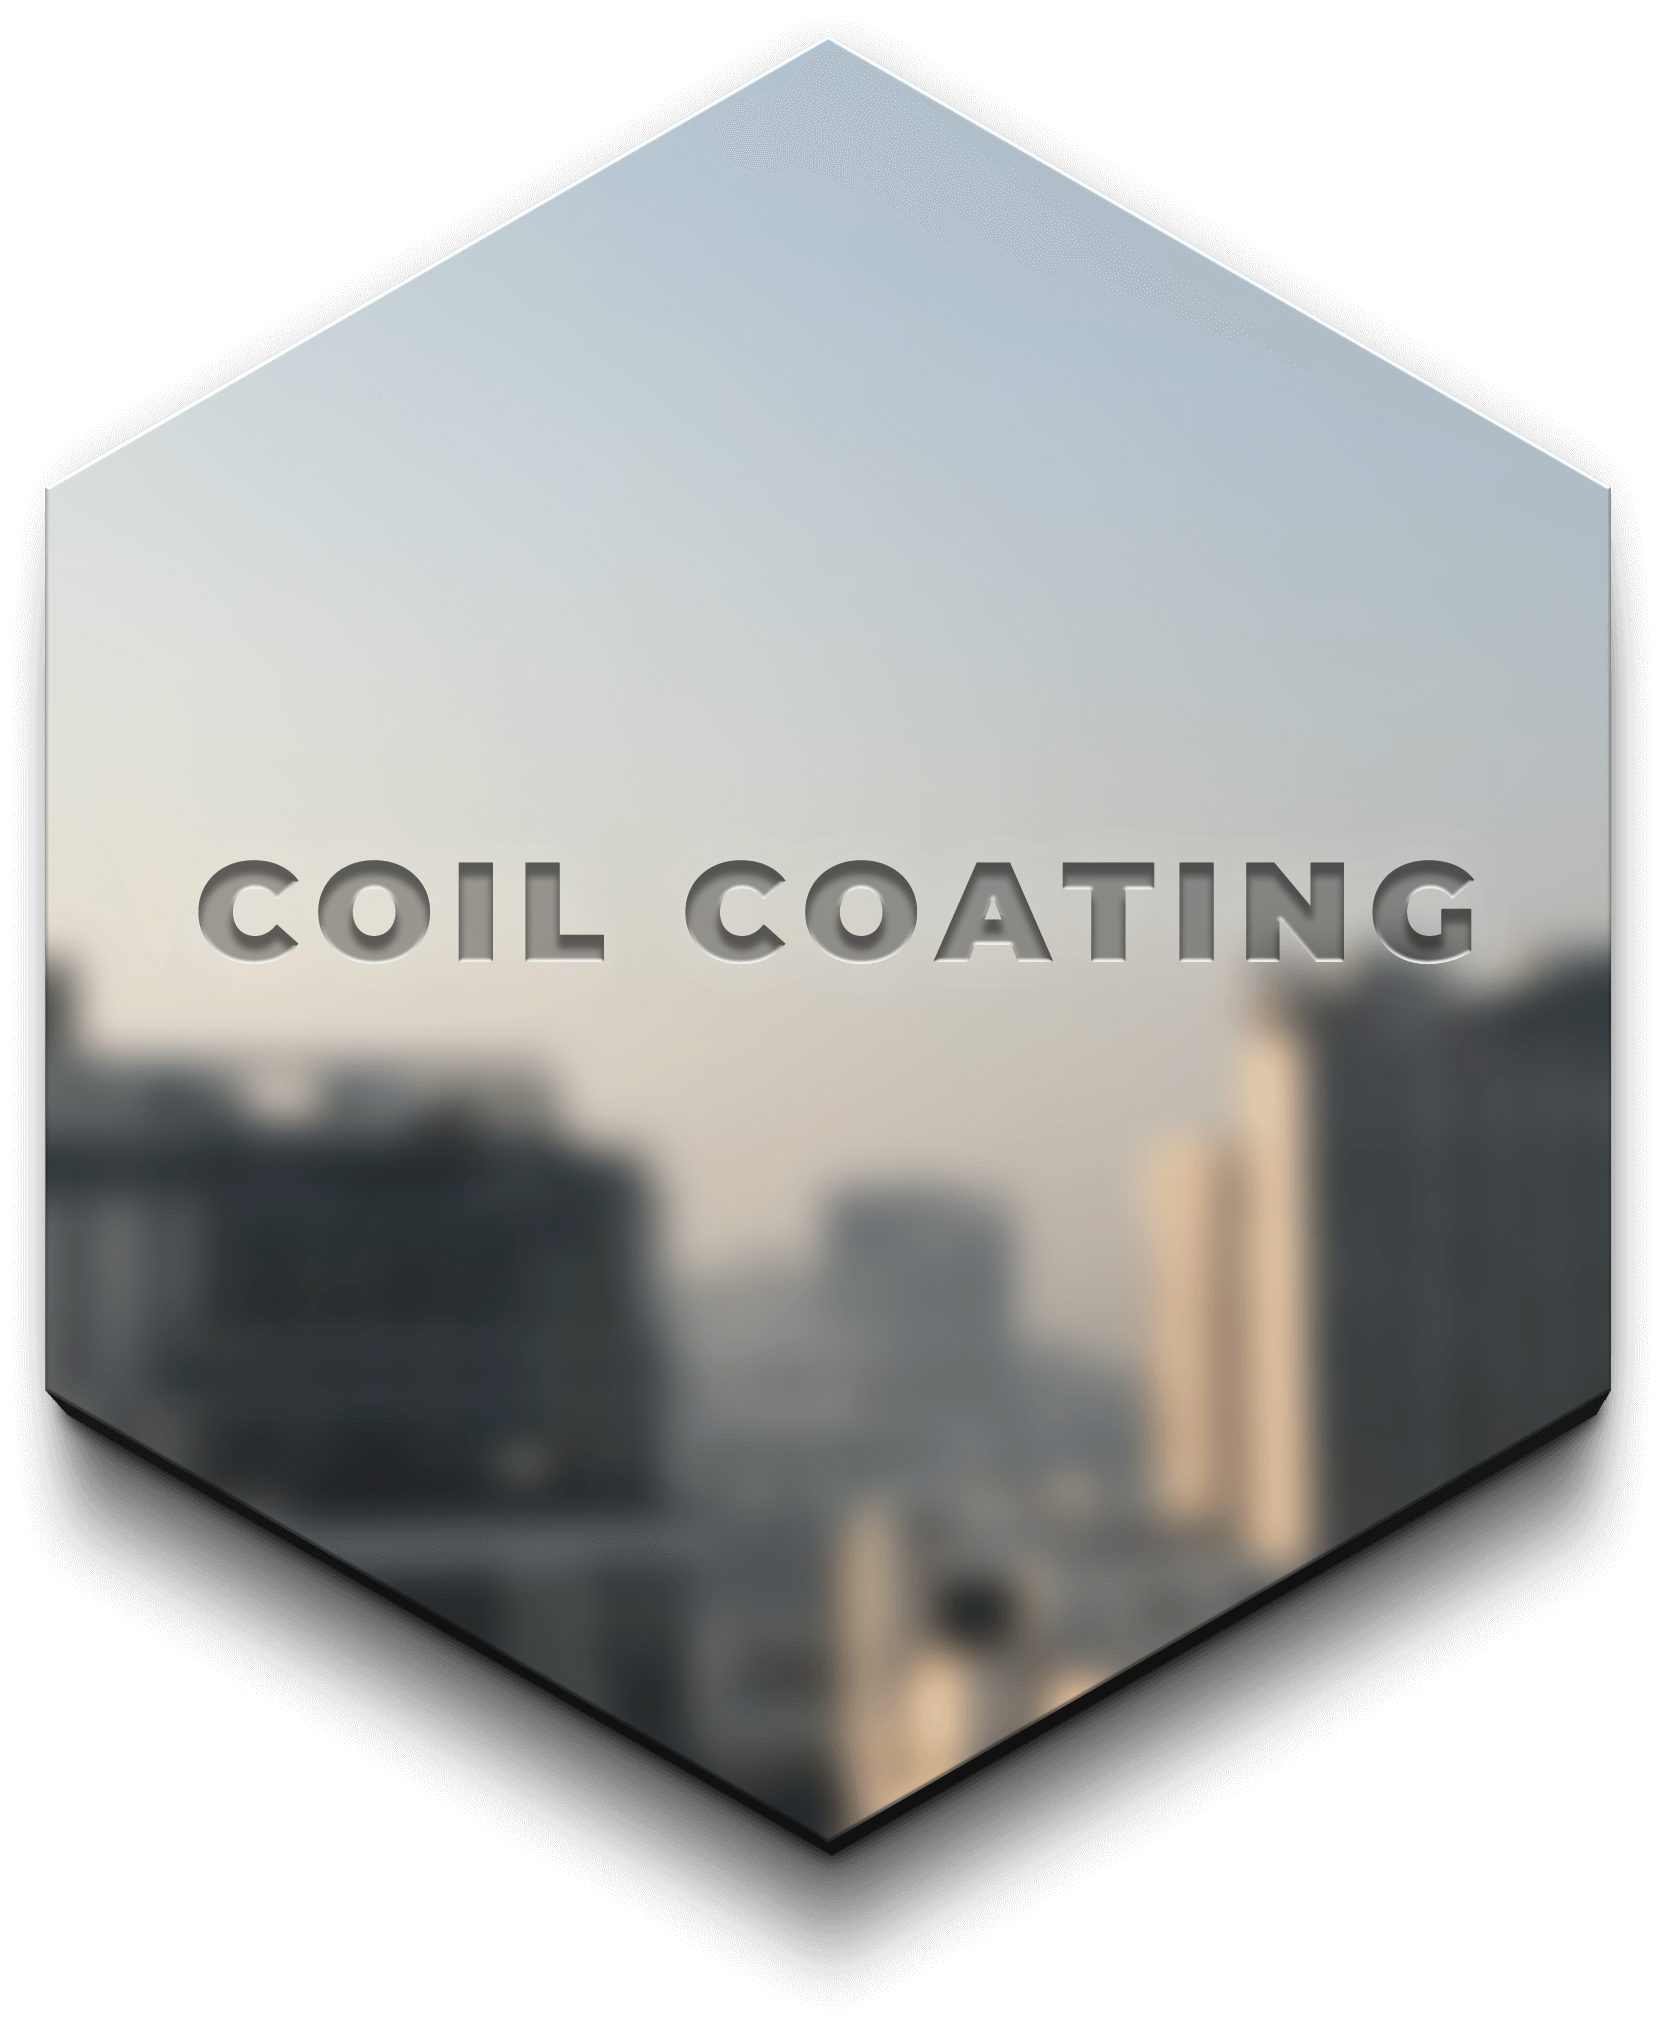 Coil coating